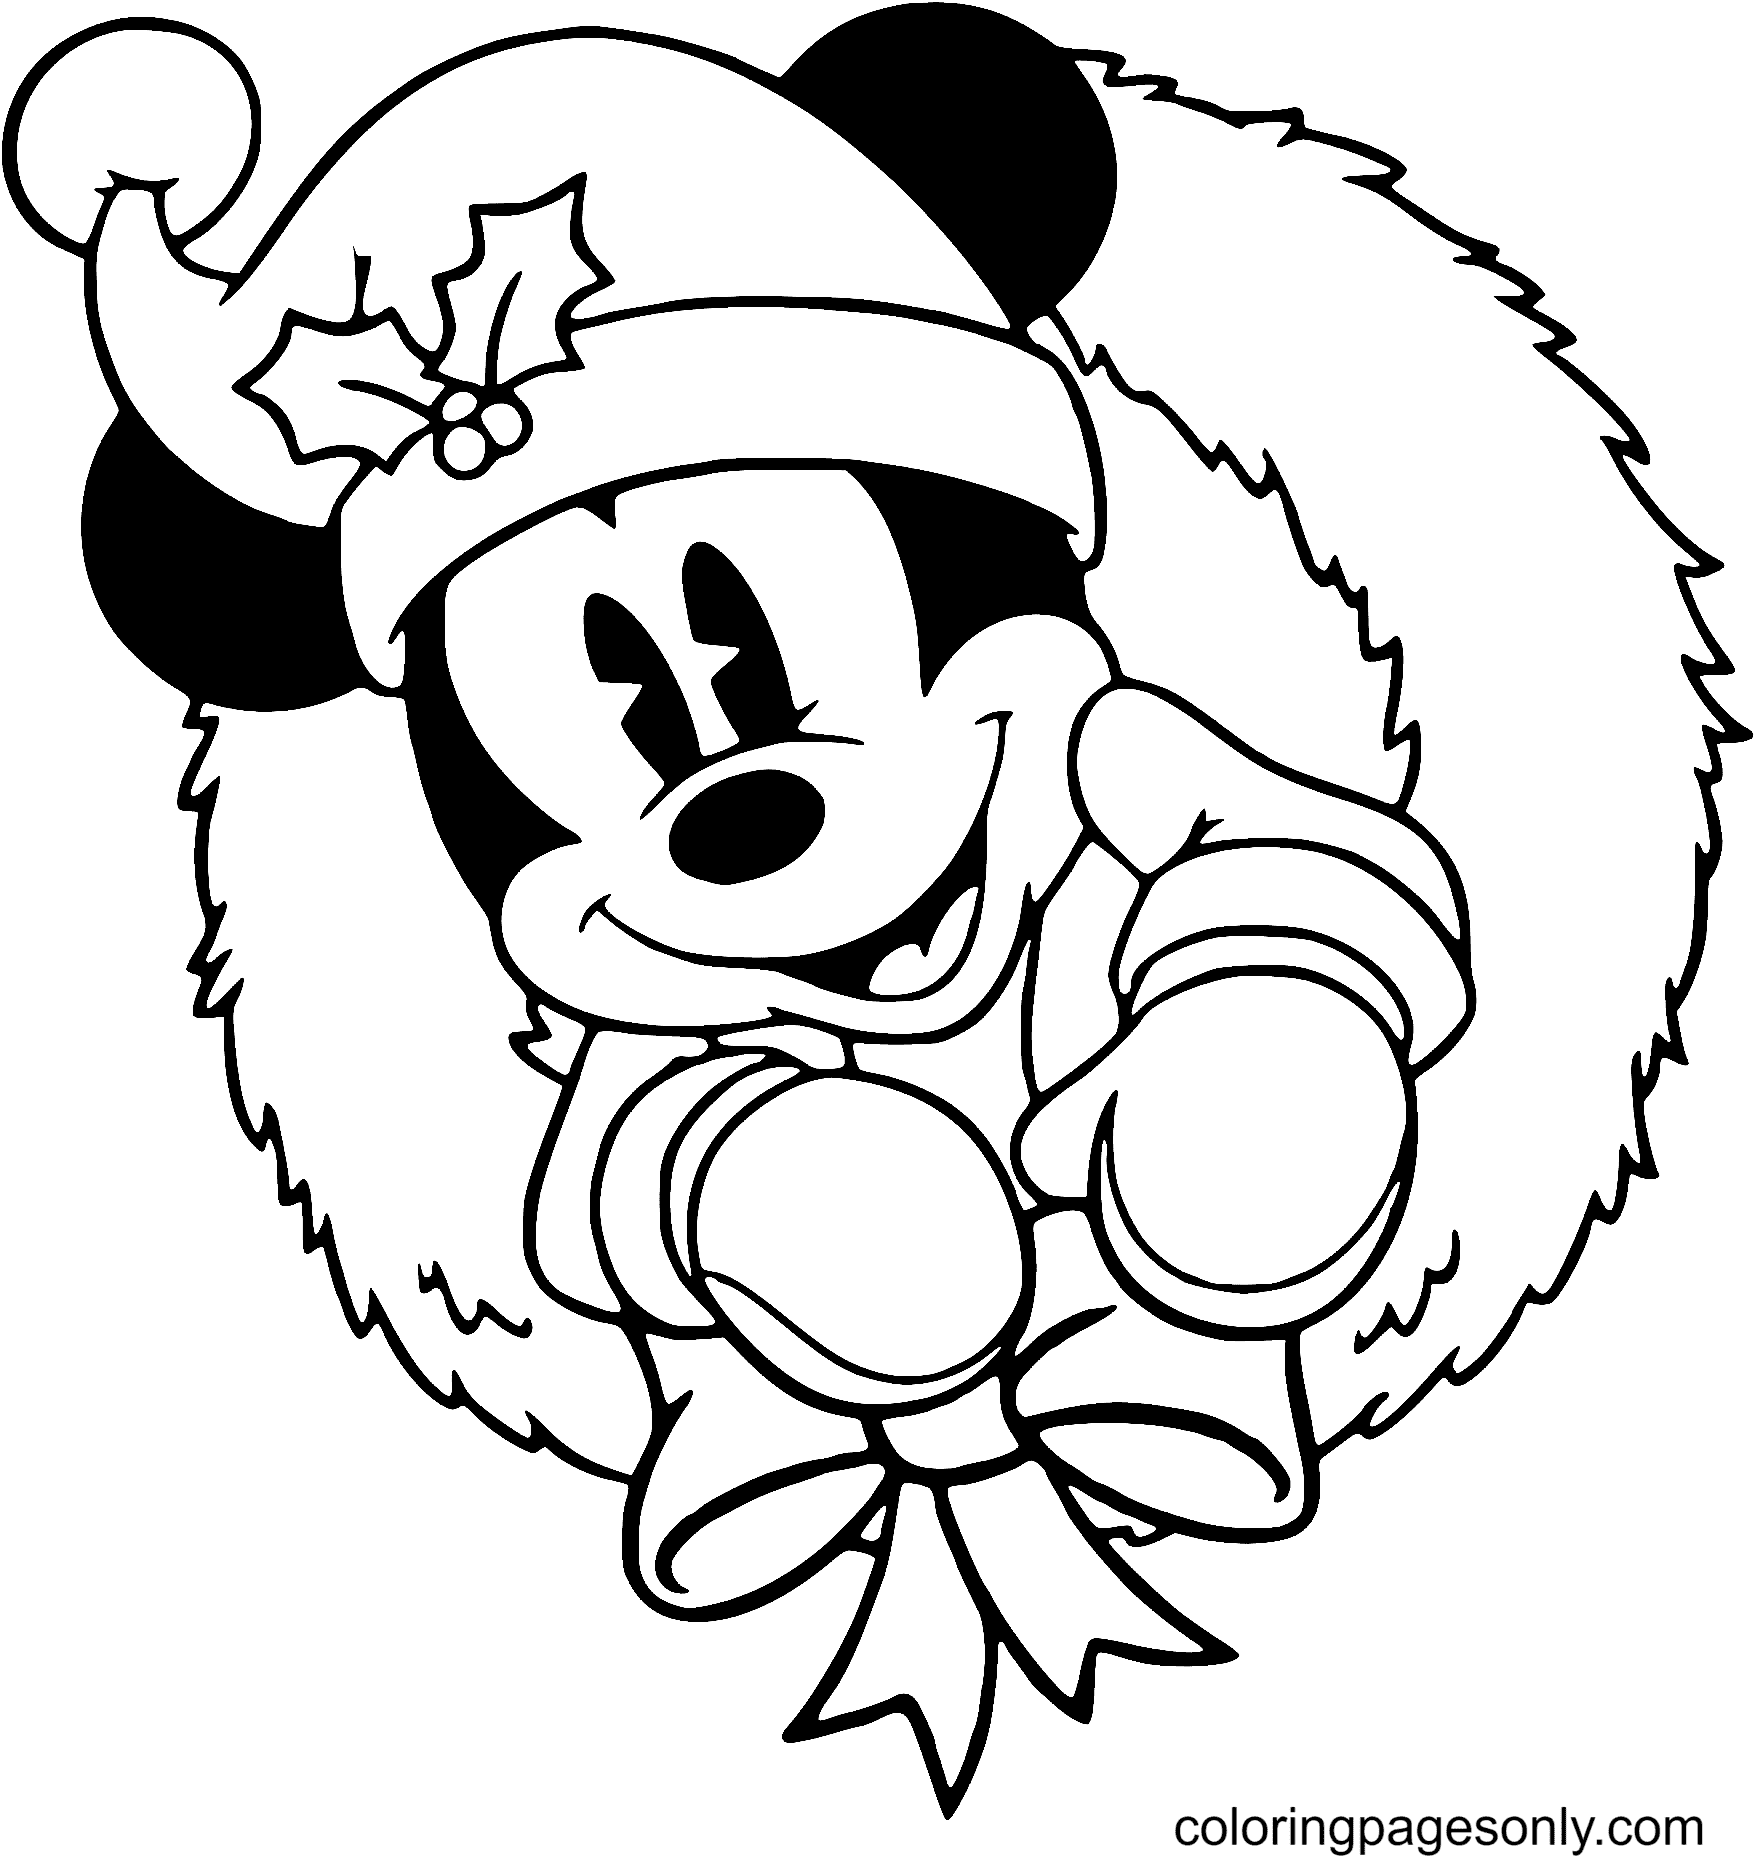 Mickey in a Christmas Wreath Coloring Page